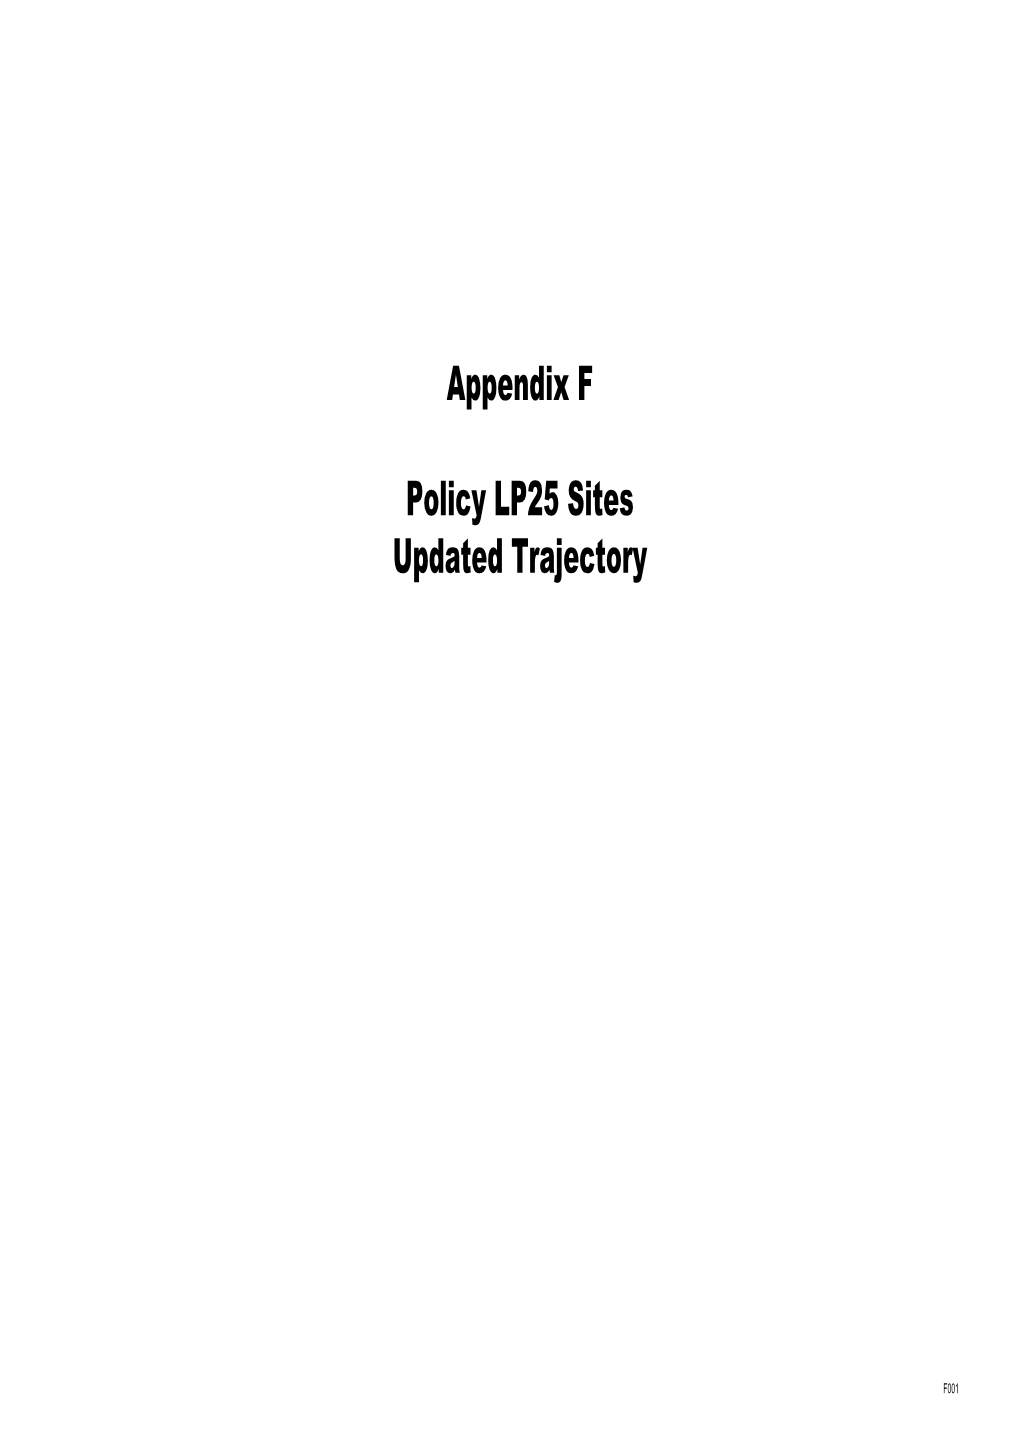 Appendix F Policy LP25 Sites Updated Trajectory